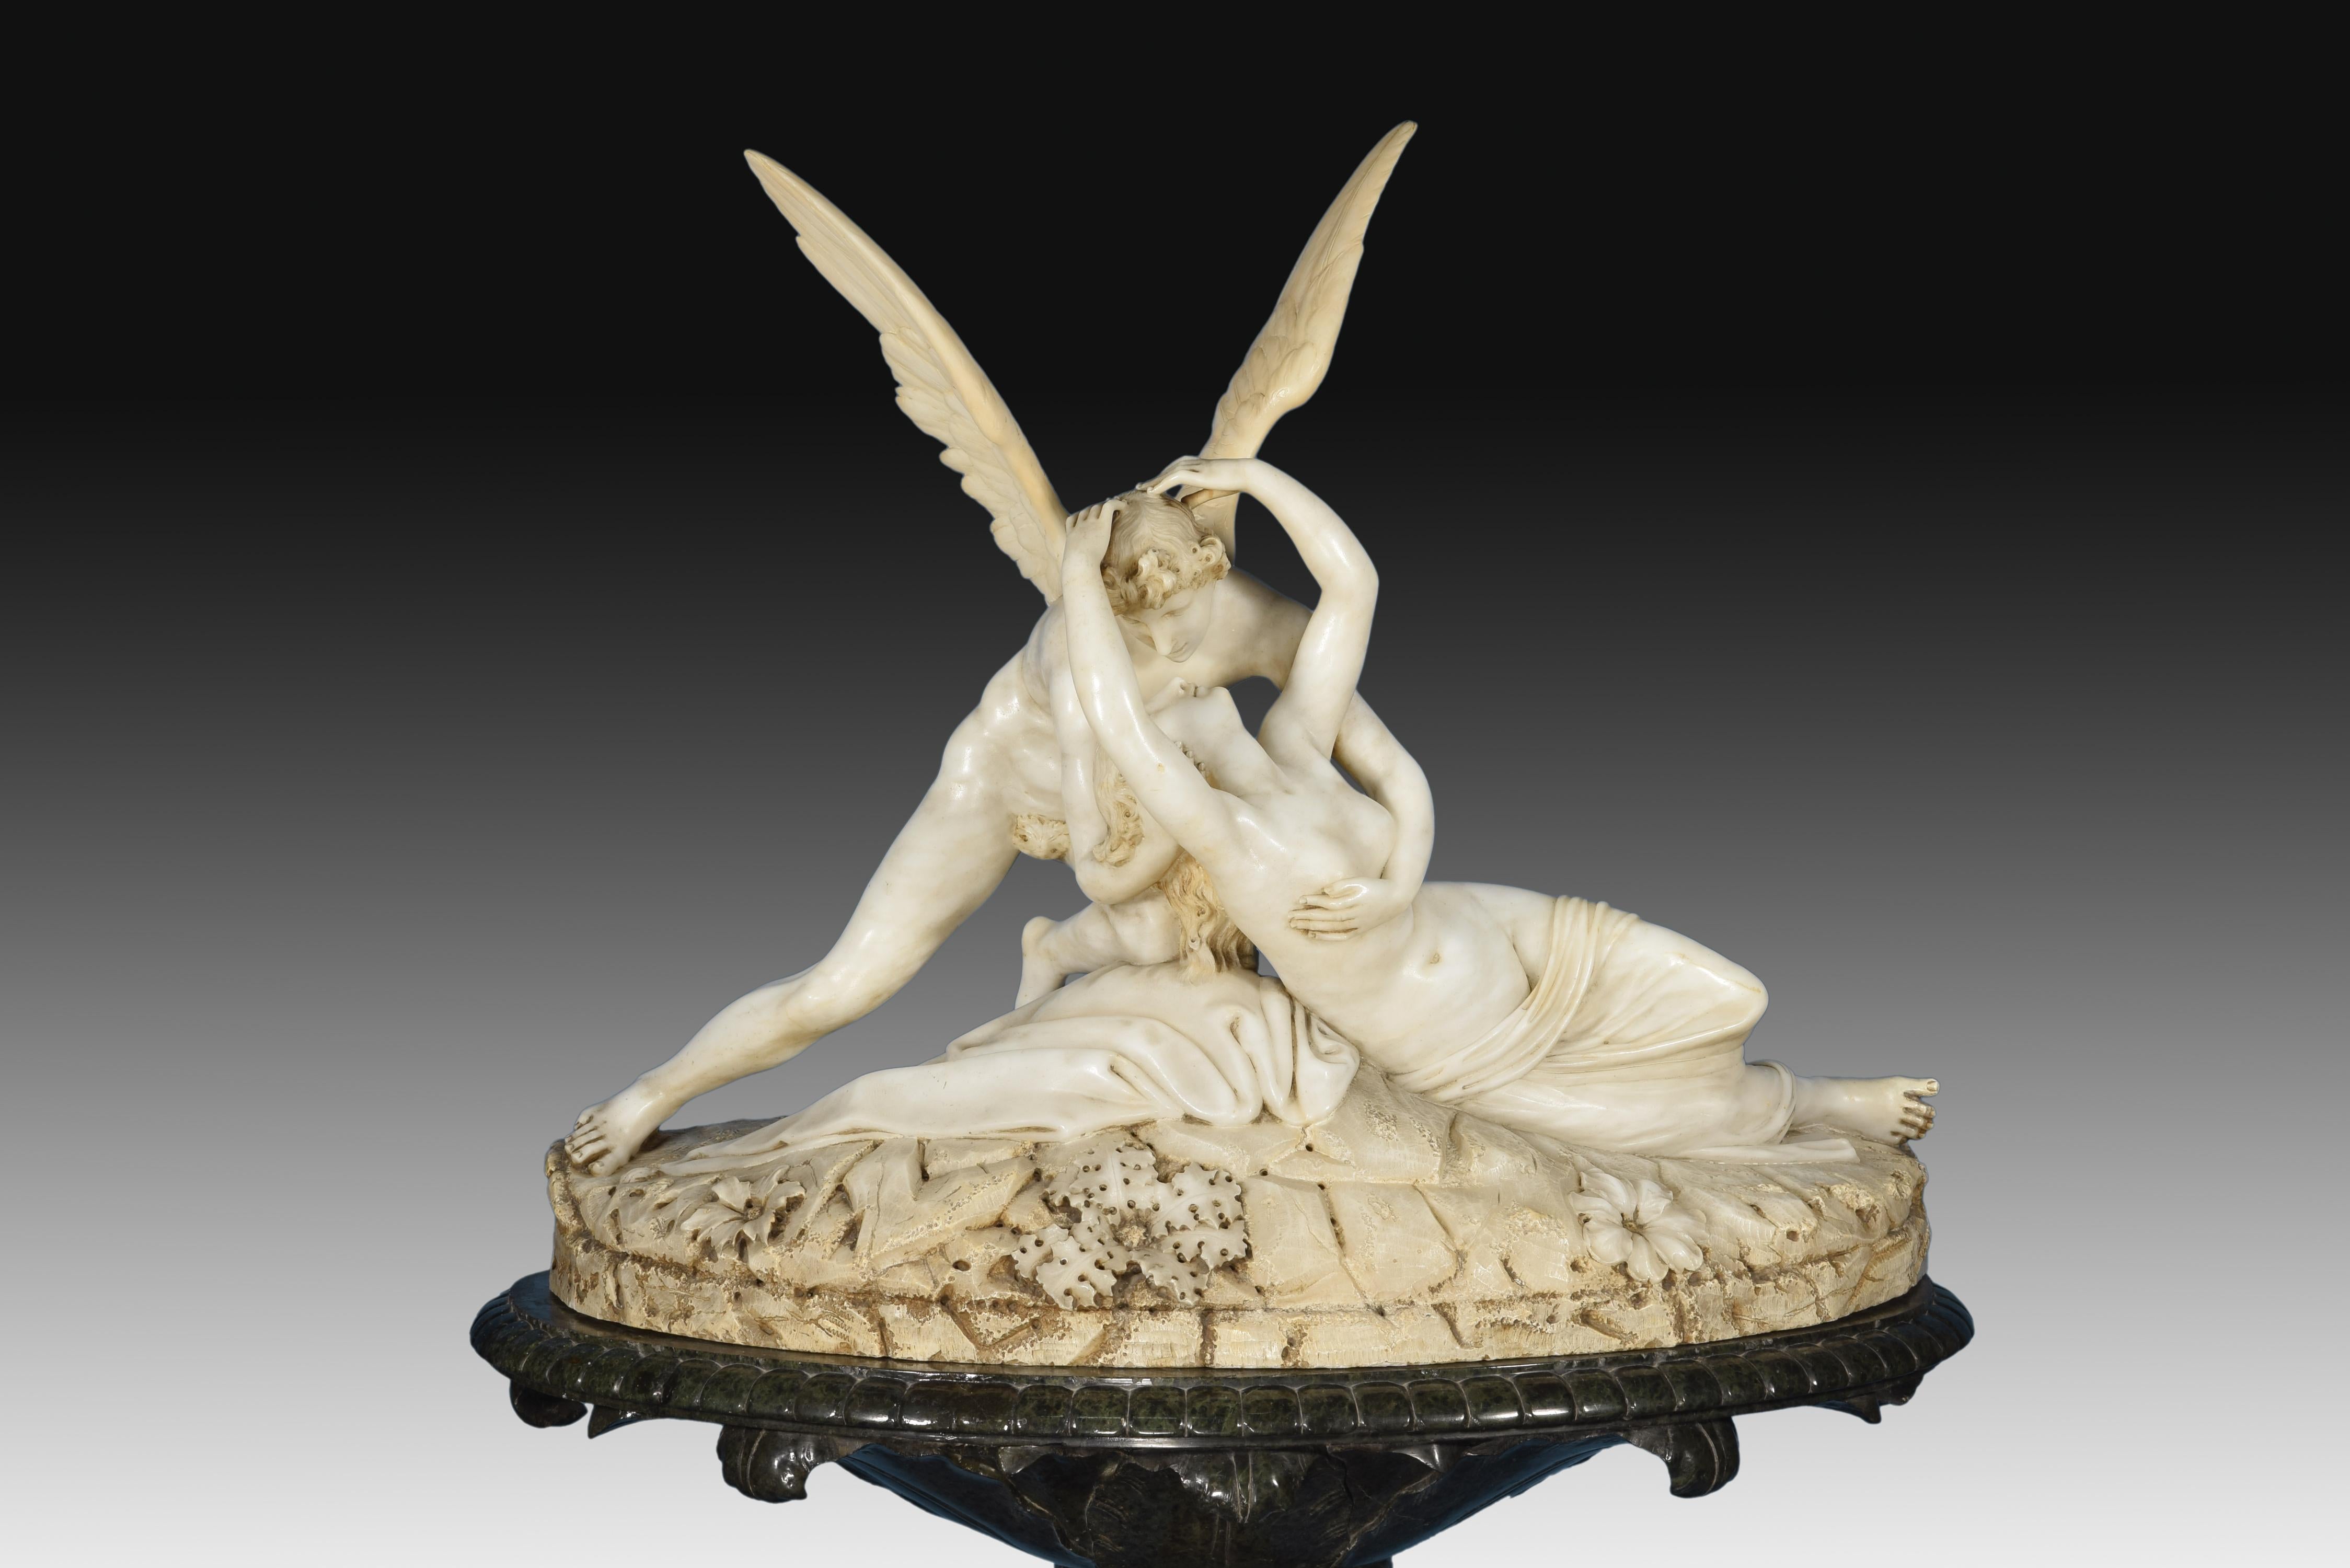 who made the sculpture of psyche awakened by cupid’s kiss